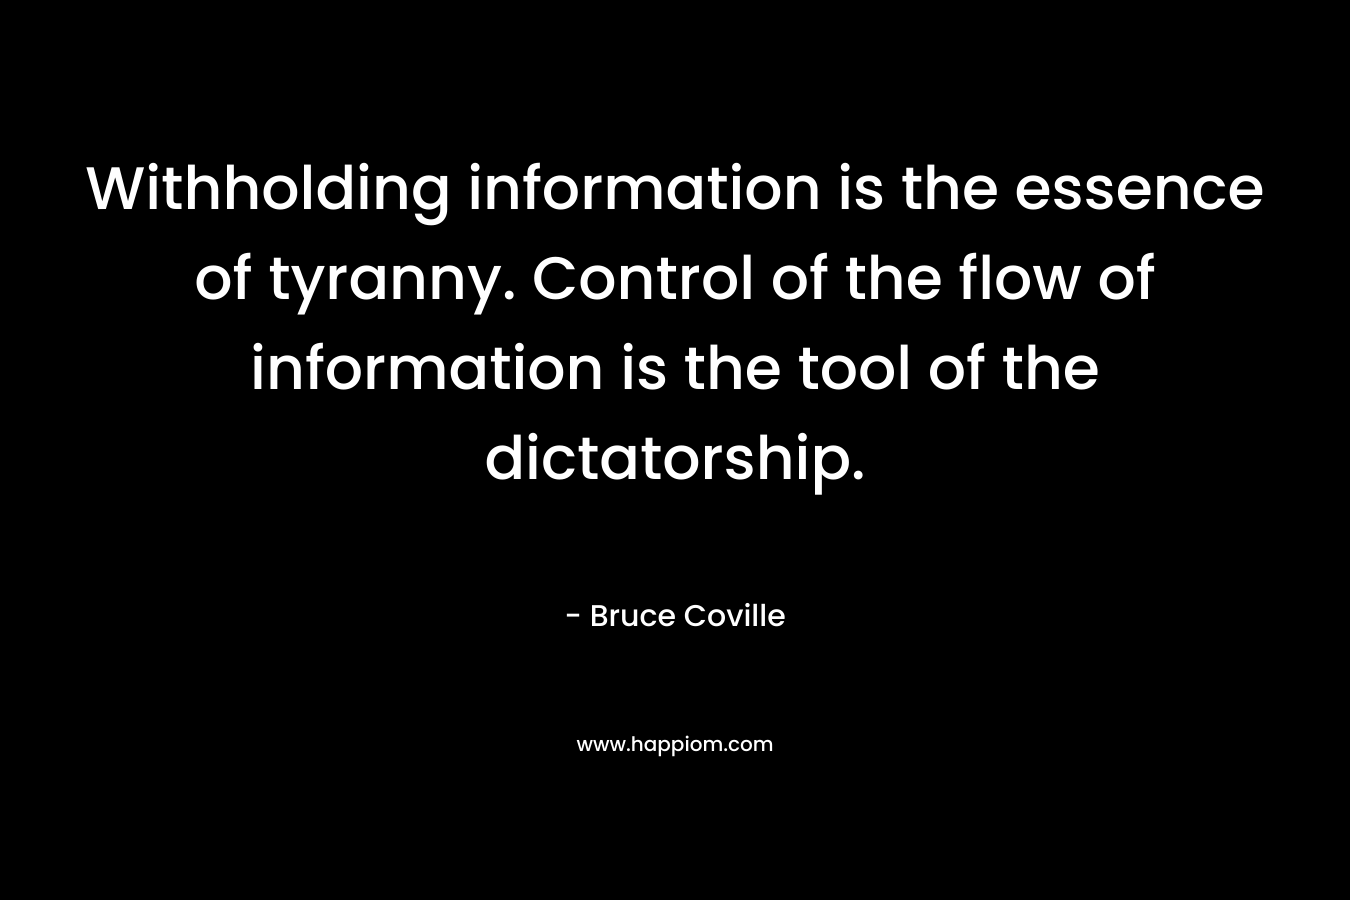 Withholding information is the essence of tyranny. Control of the flow of information is the tool of the dictatorship.